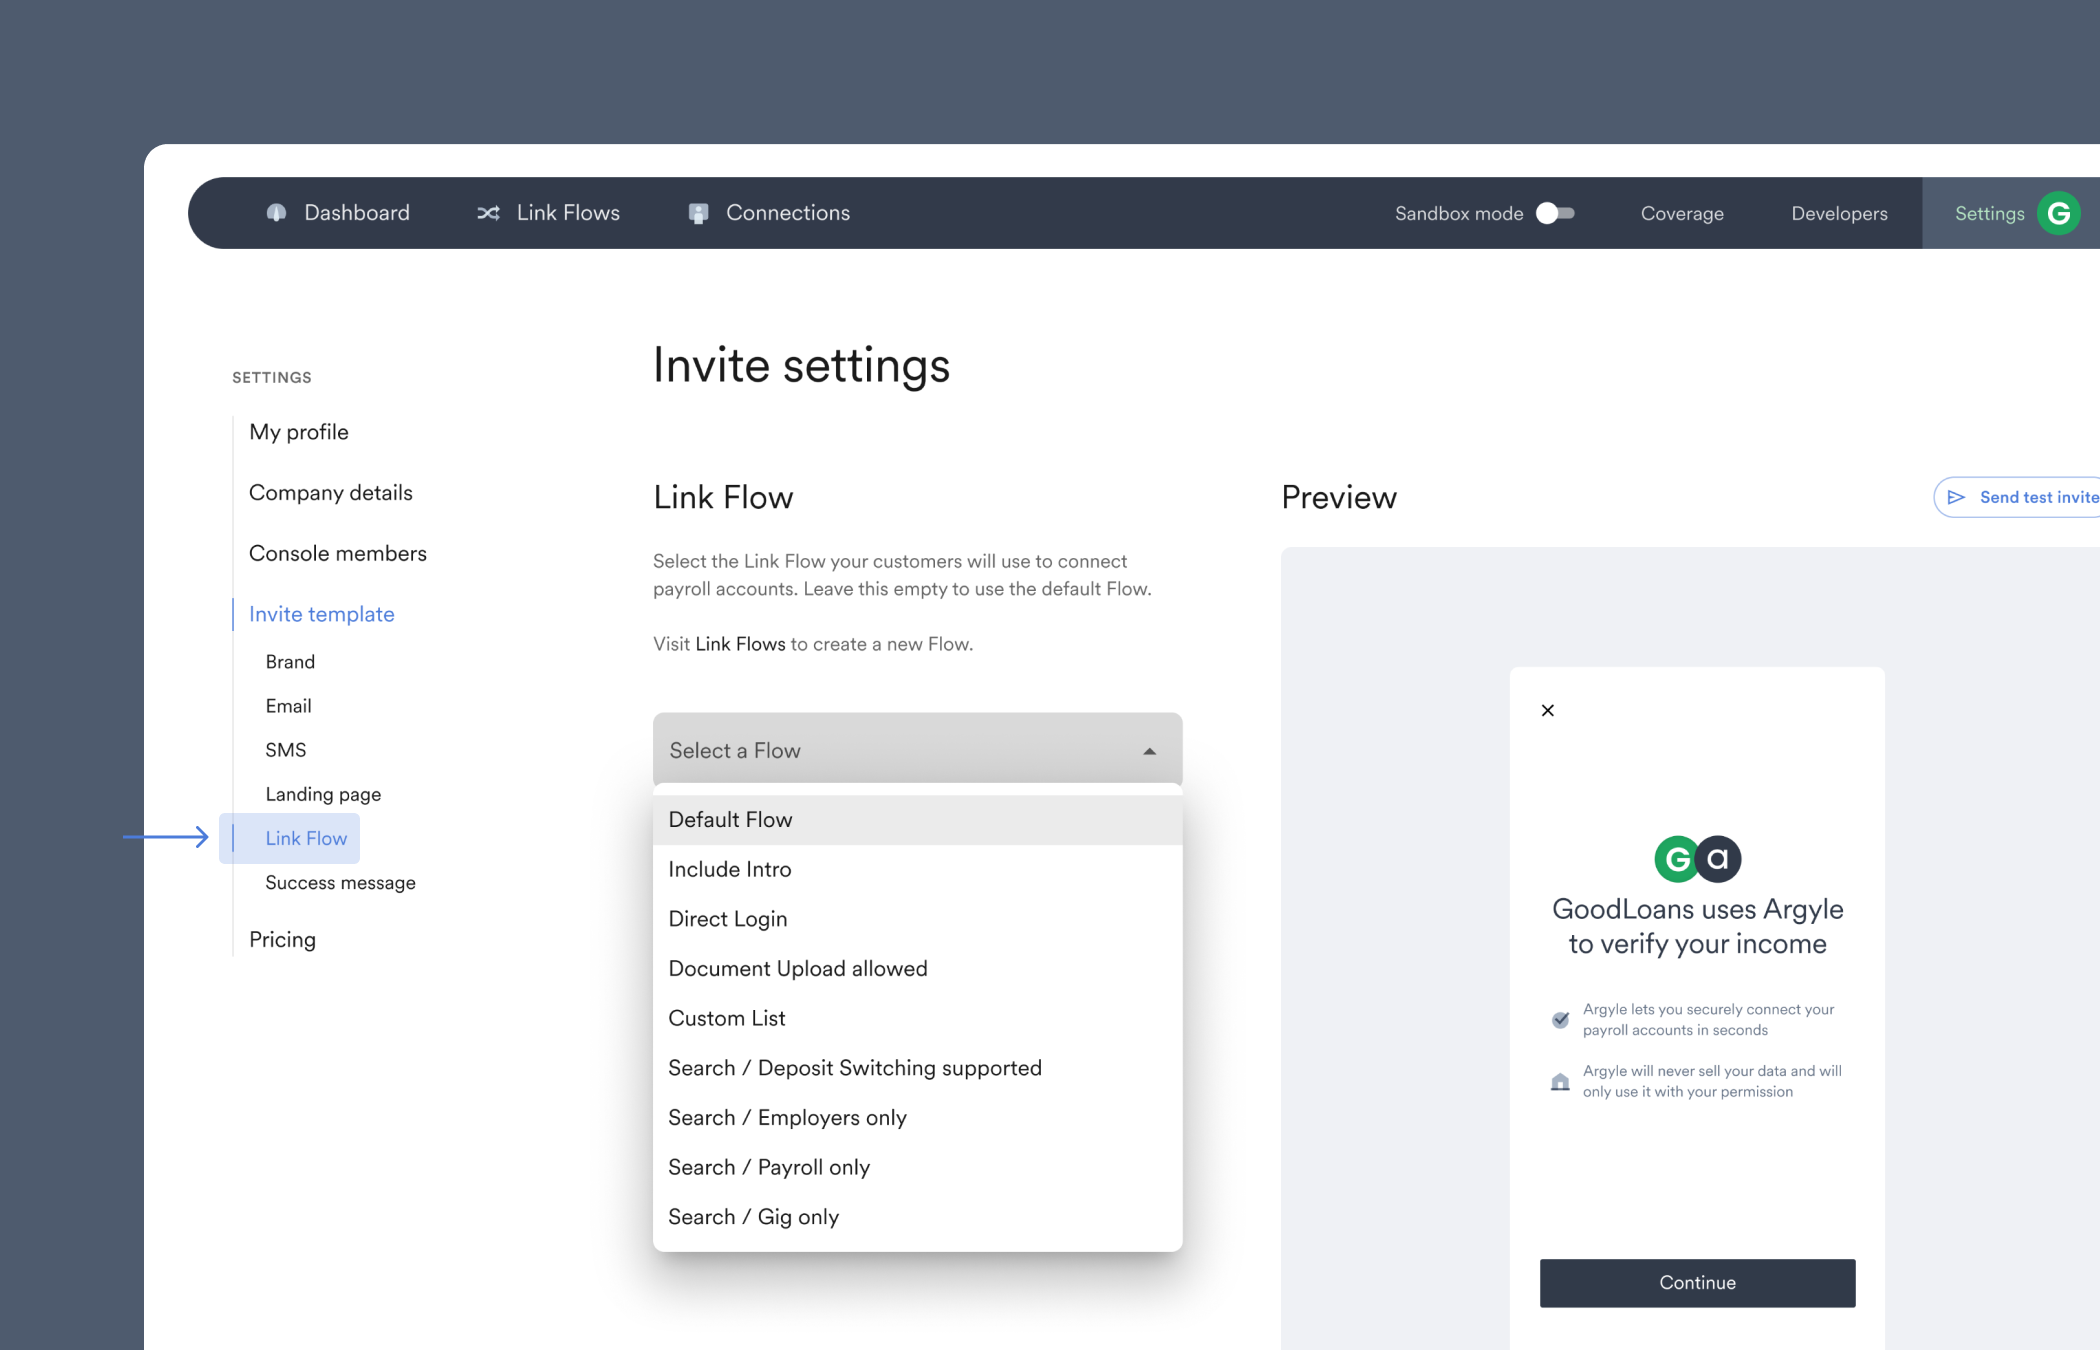 Link Flow customizations can be added to invites from the Settings section of Console.